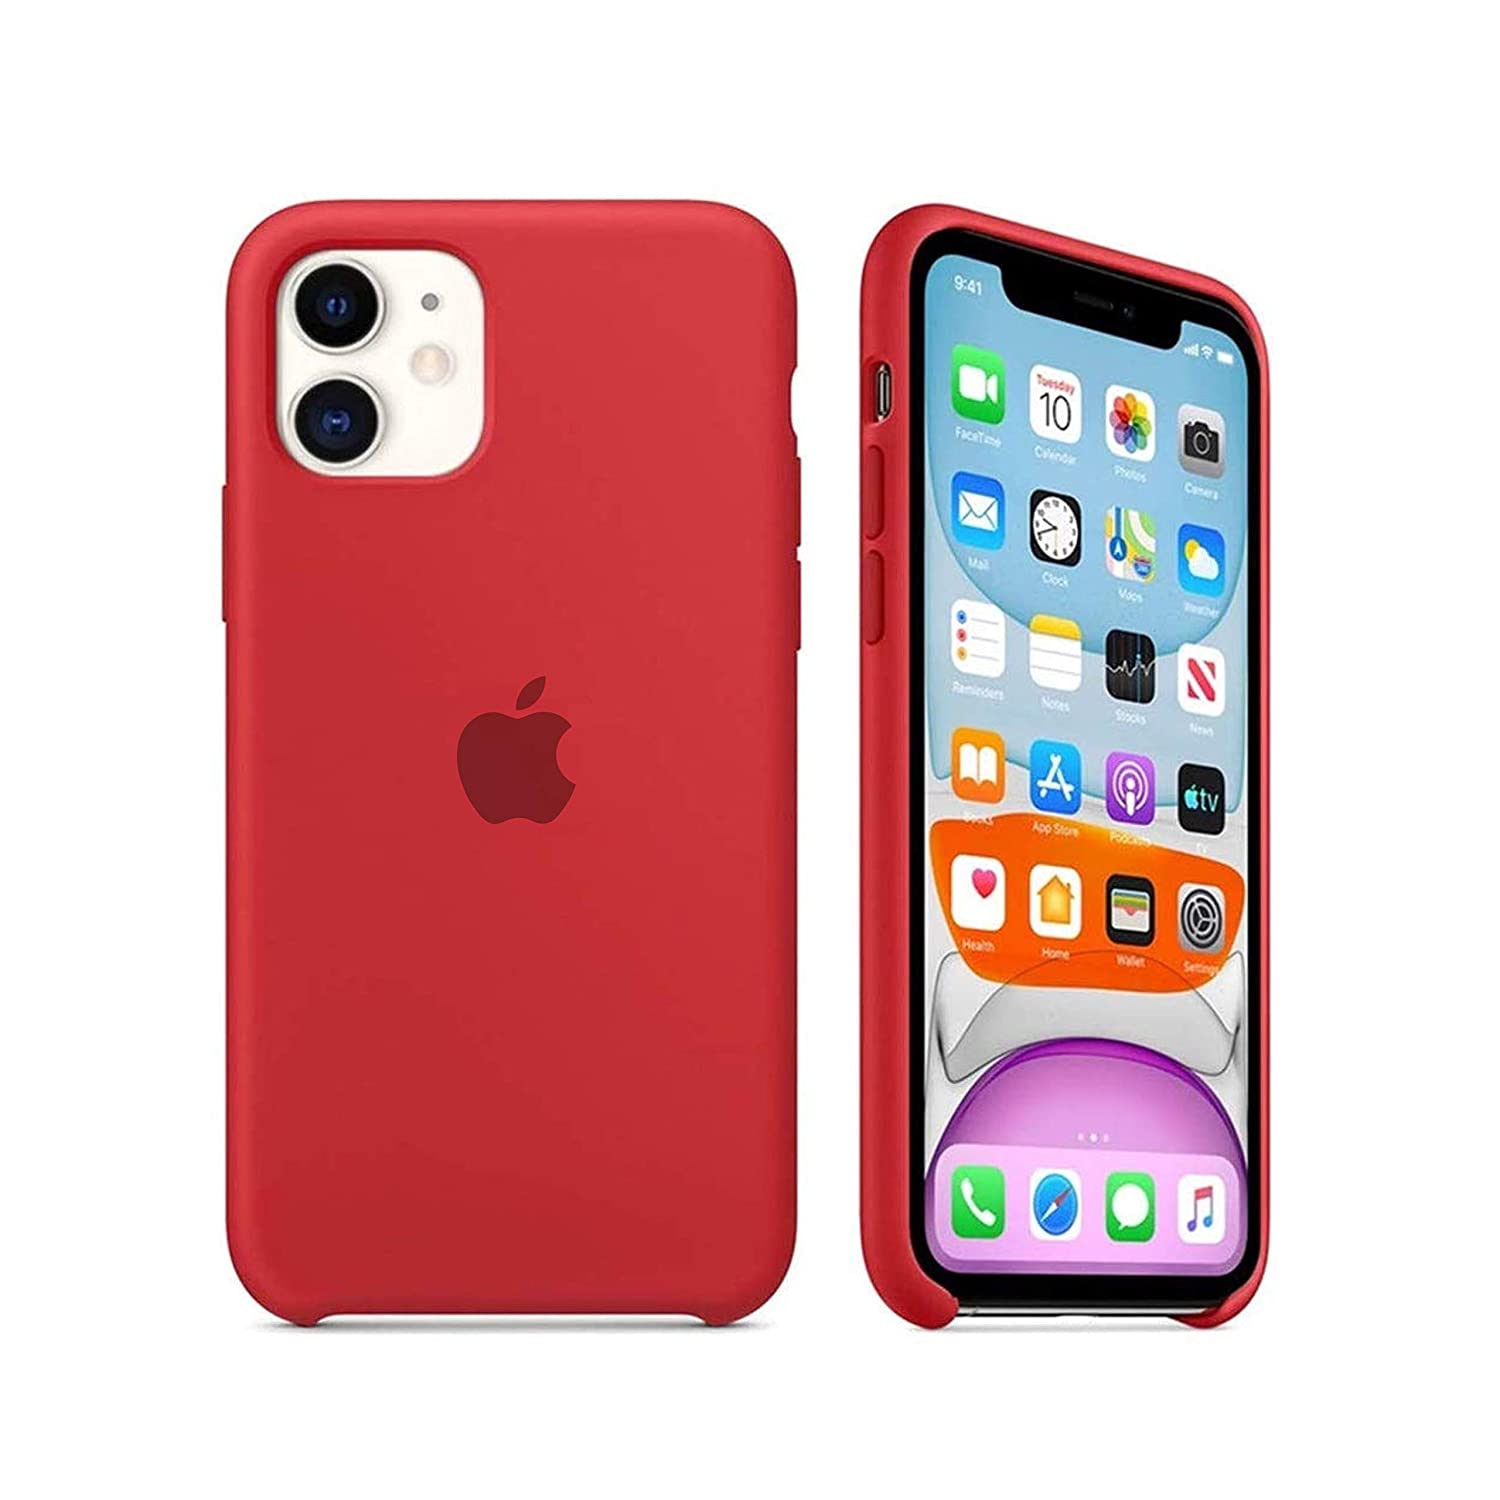 Apple iPhone 11 Liquid Silicone Soft Back Cases and Cover with Apple ...